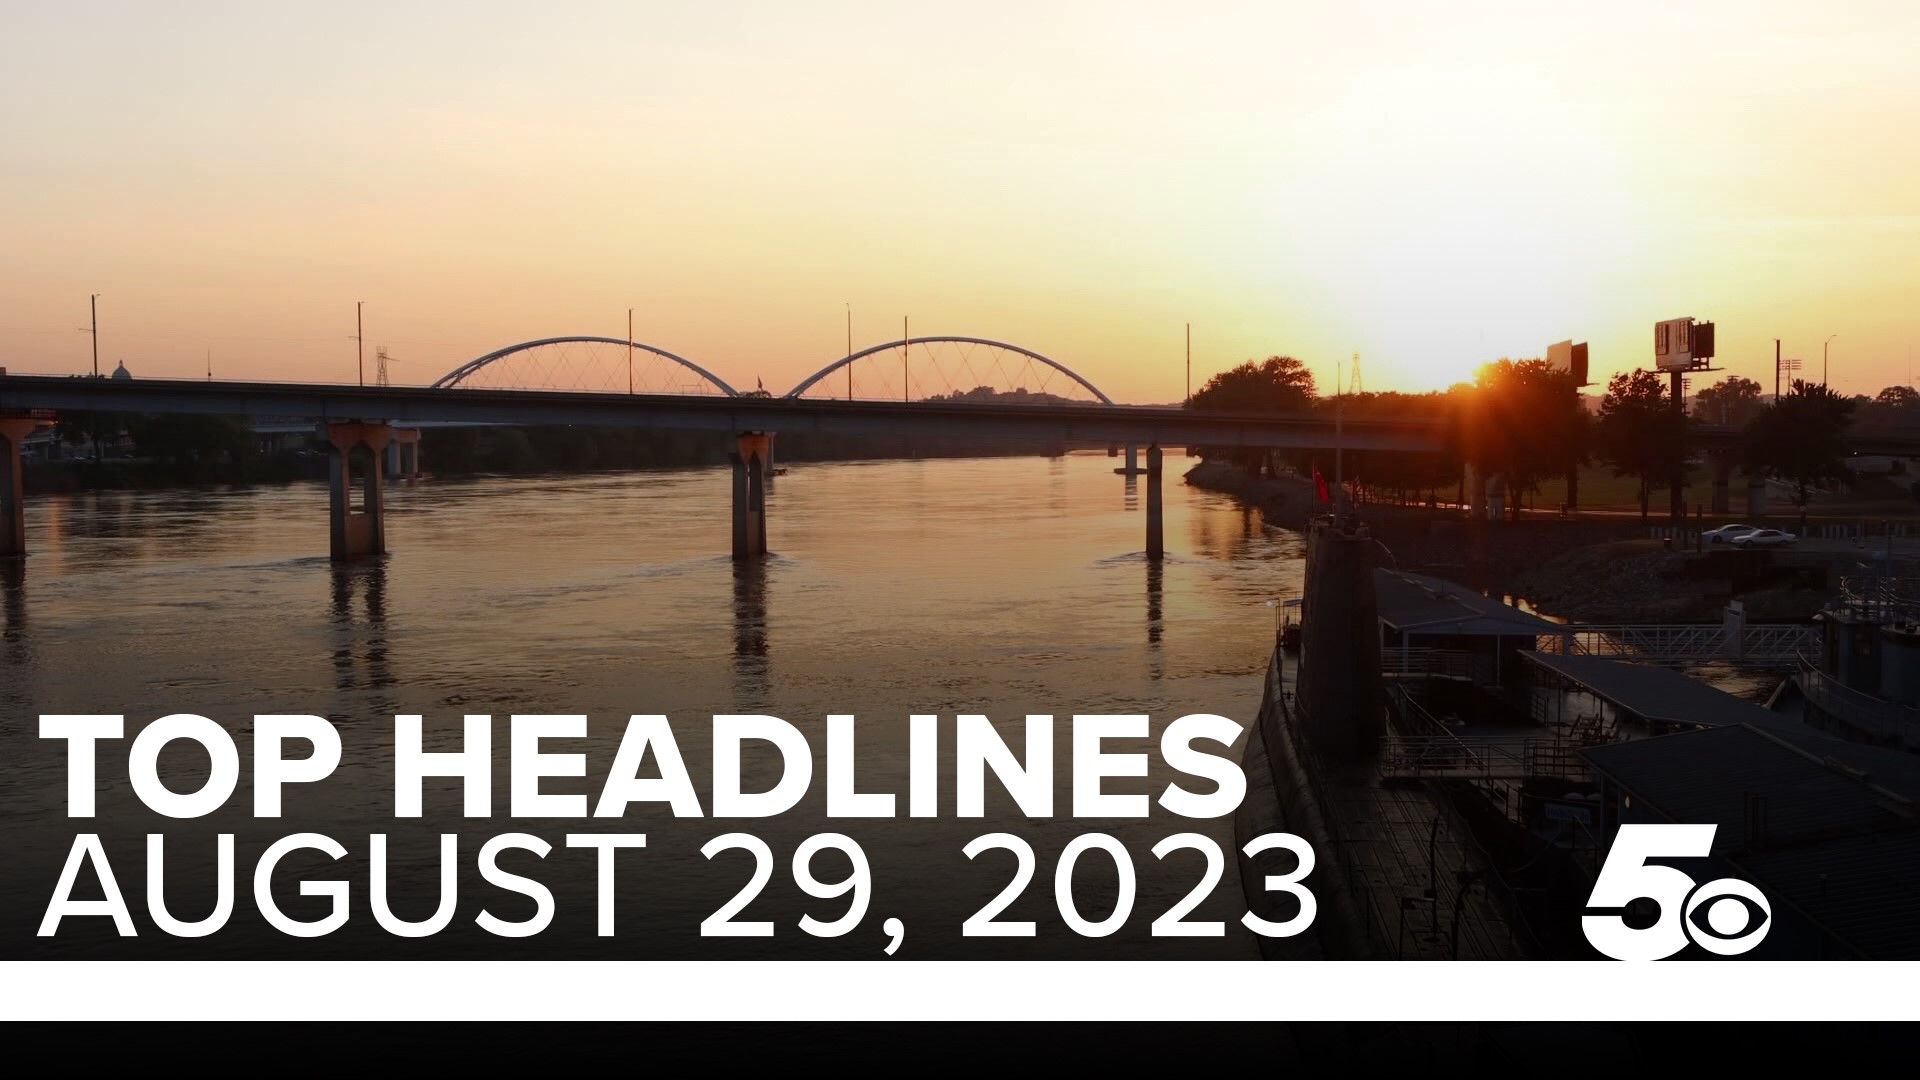 Top headlines for Northwest Arkansas and the River Valley for August 29, 2023.